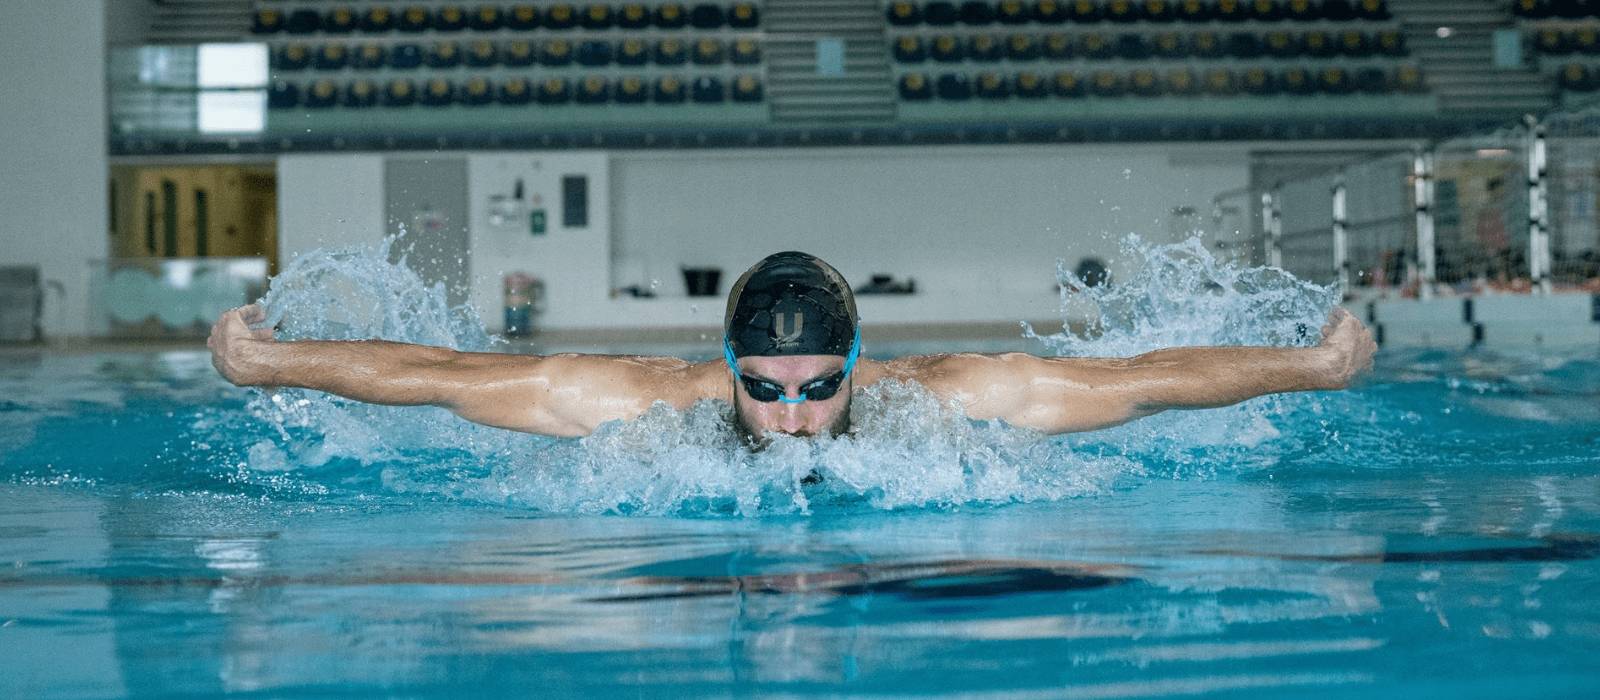 man swimming butterfly stroke in swimming pool wearing black and gold U Perform swimming cap